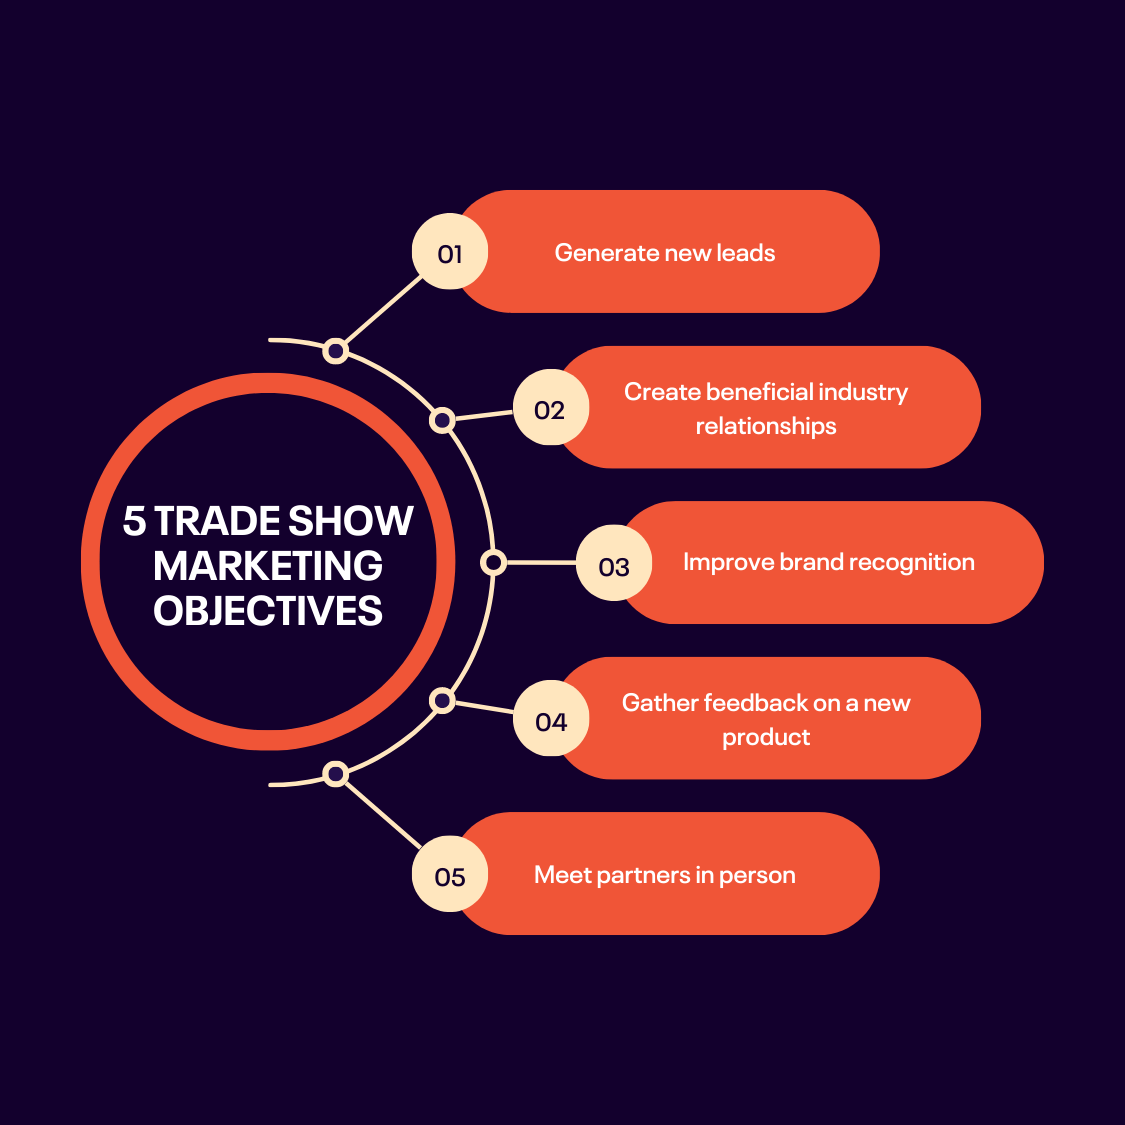 Trade show marketing objectives infographic